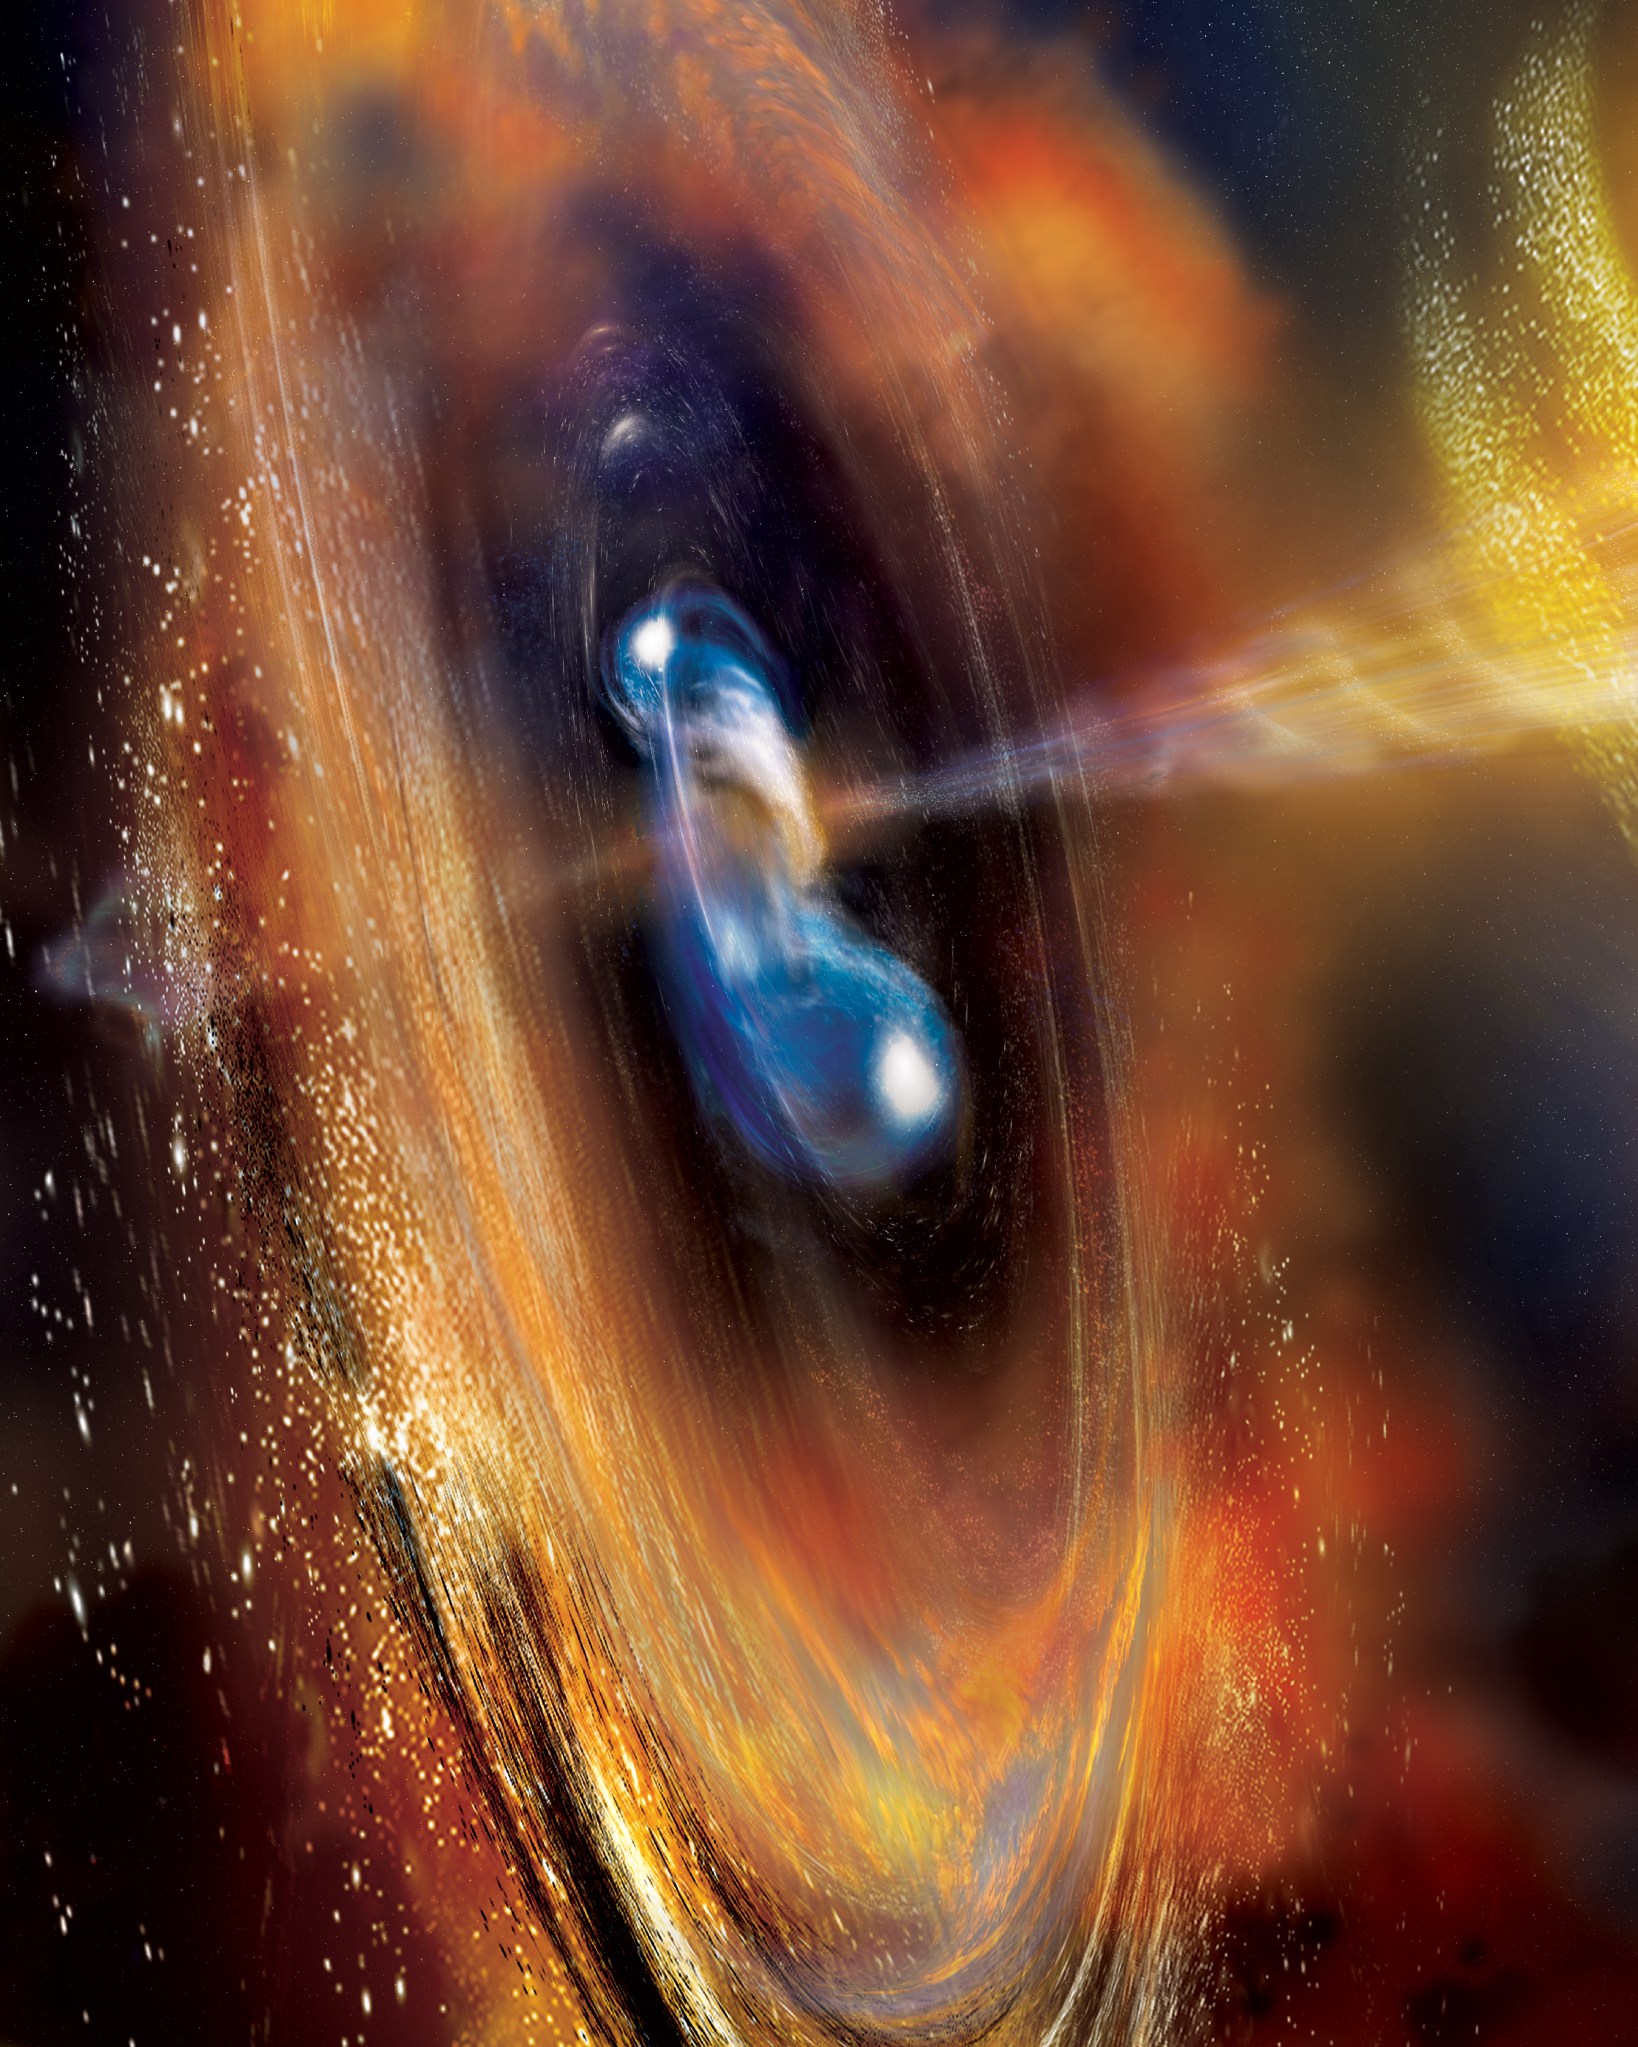 Two neutron stars begin to merge in this artist's concept, blasting jets of high-speed particles. Collision events like this one create short gamma-ray bursts. Credit: NASA's Goddard Space Flight Center/ A. Simonnet, Sonoma State University